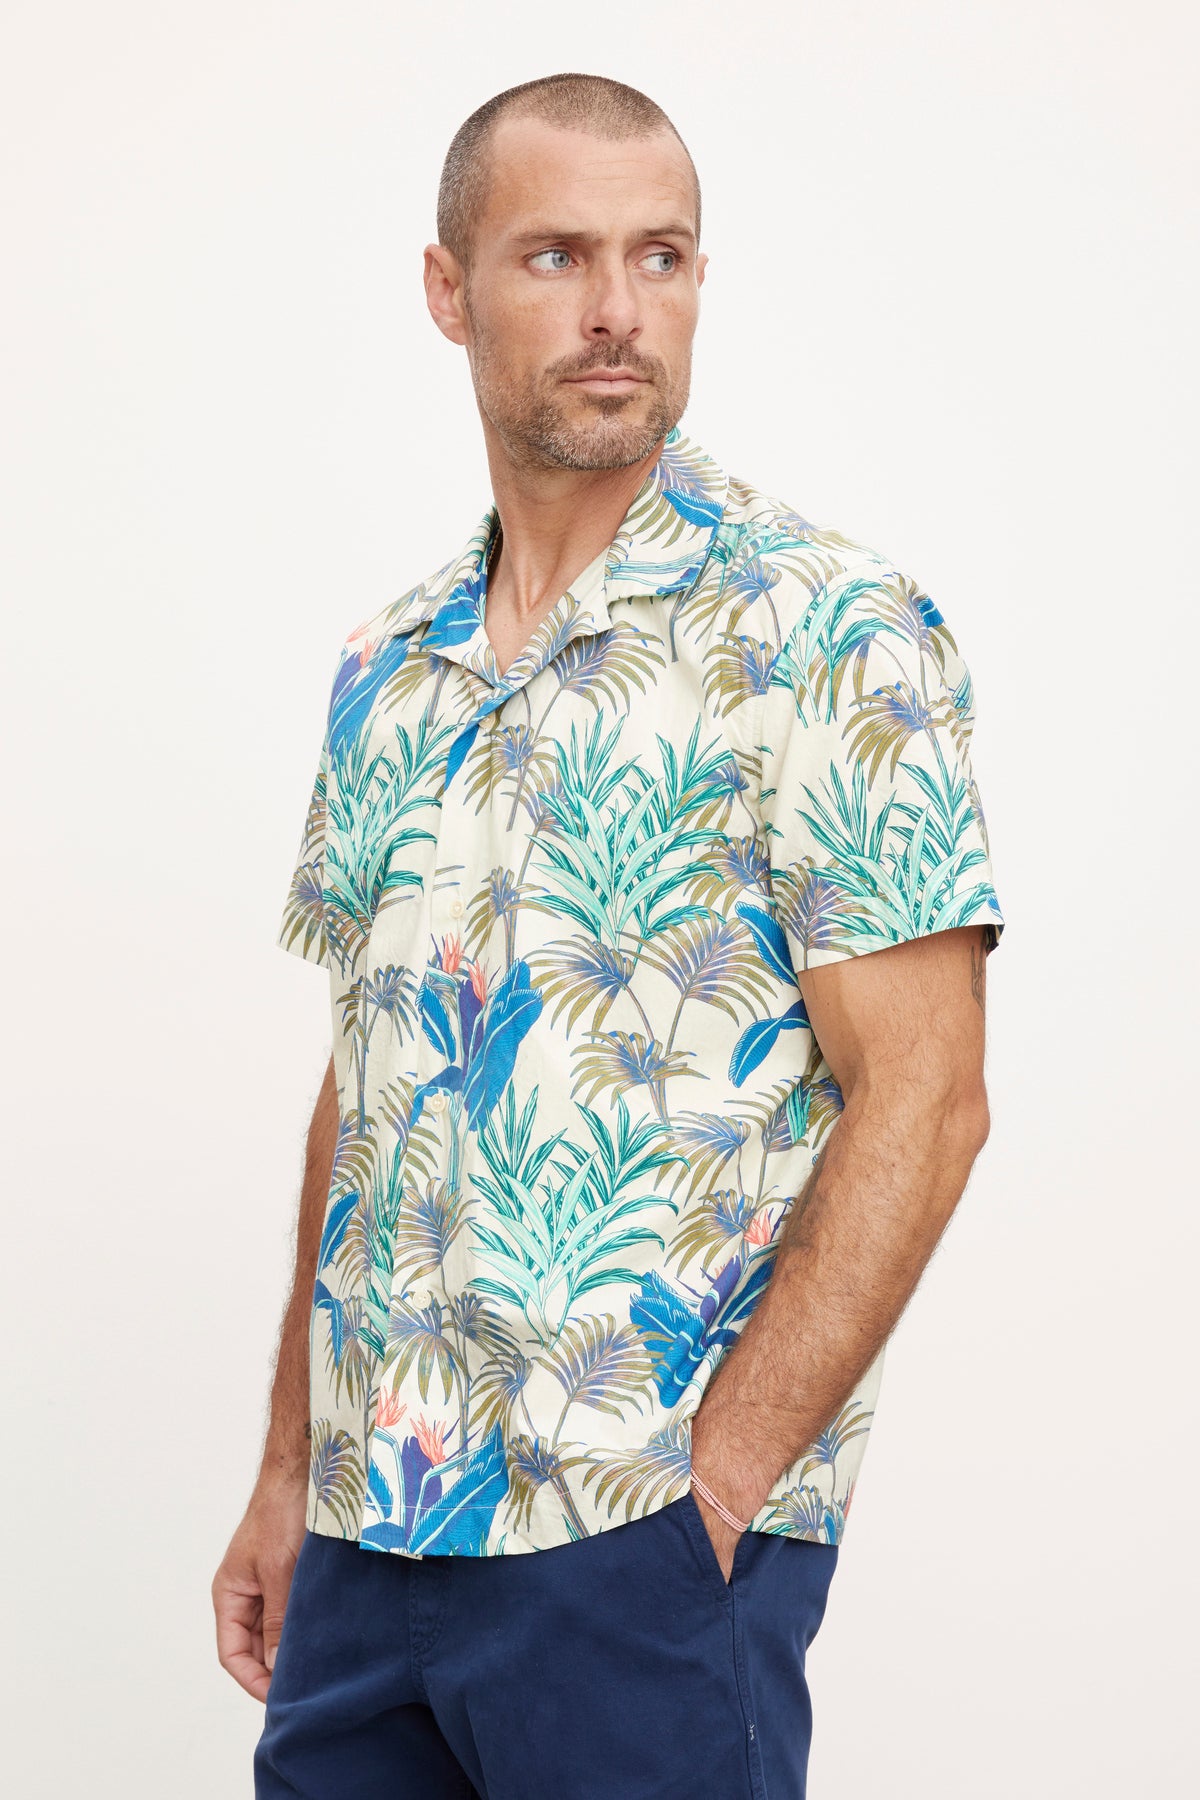 A man in a casual Iggy button-up shirt from Velvet by Graham & Spencer stands facing left, looking ahead with a neutral expression.-36805461409985